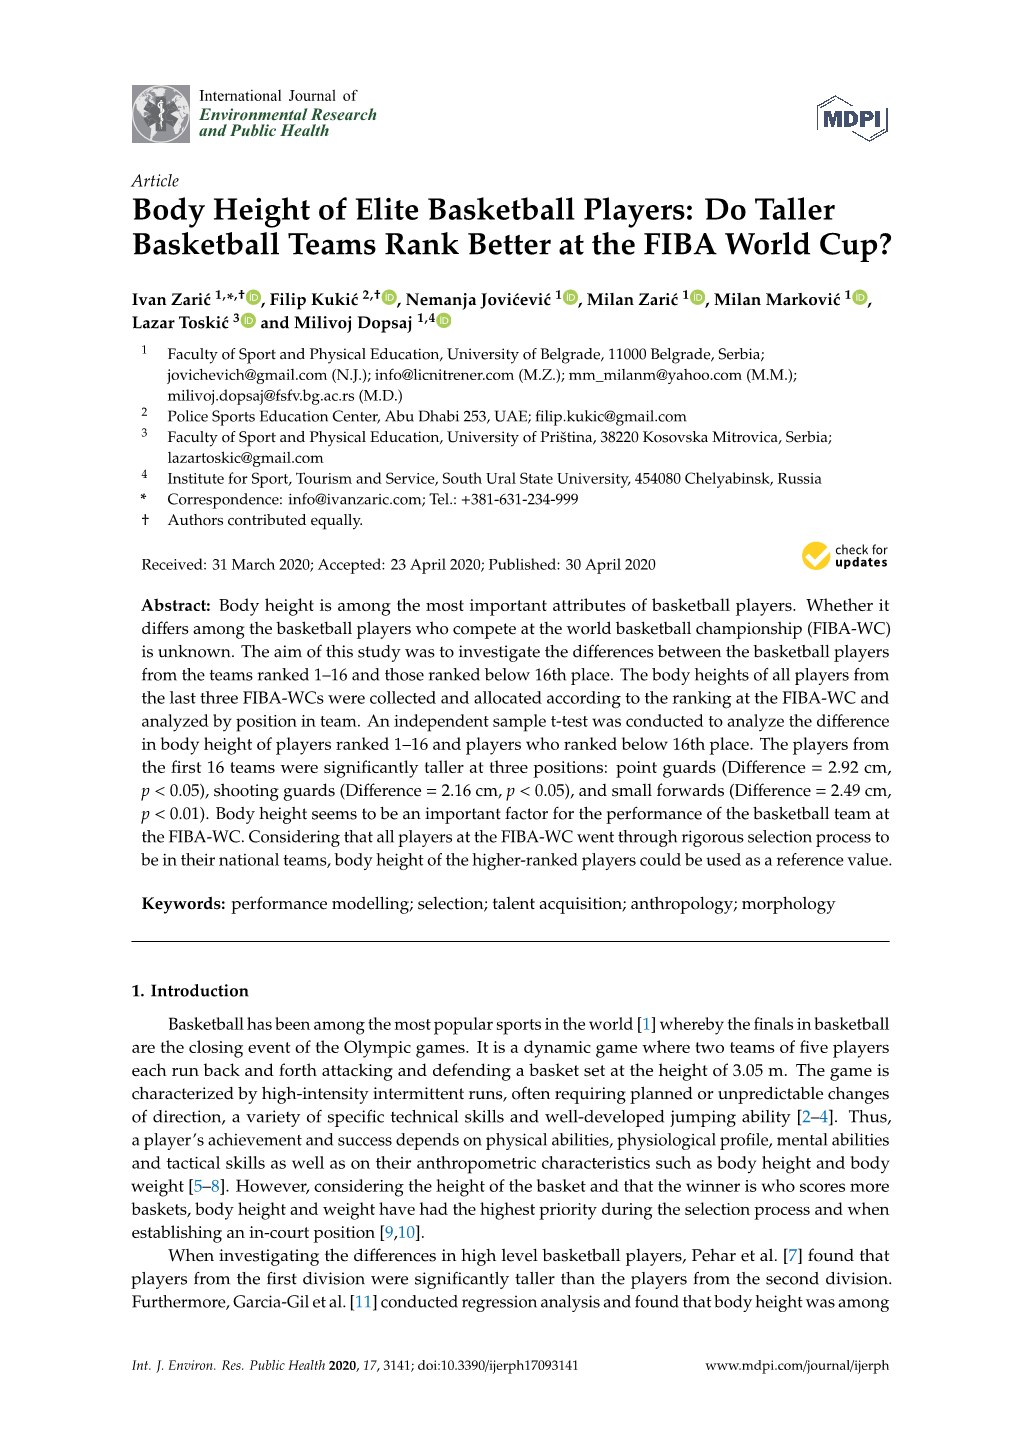 Body Height of Elite Basketball Players: Do Taller Basketball Teams Rank Better at the FIBA World Cup?